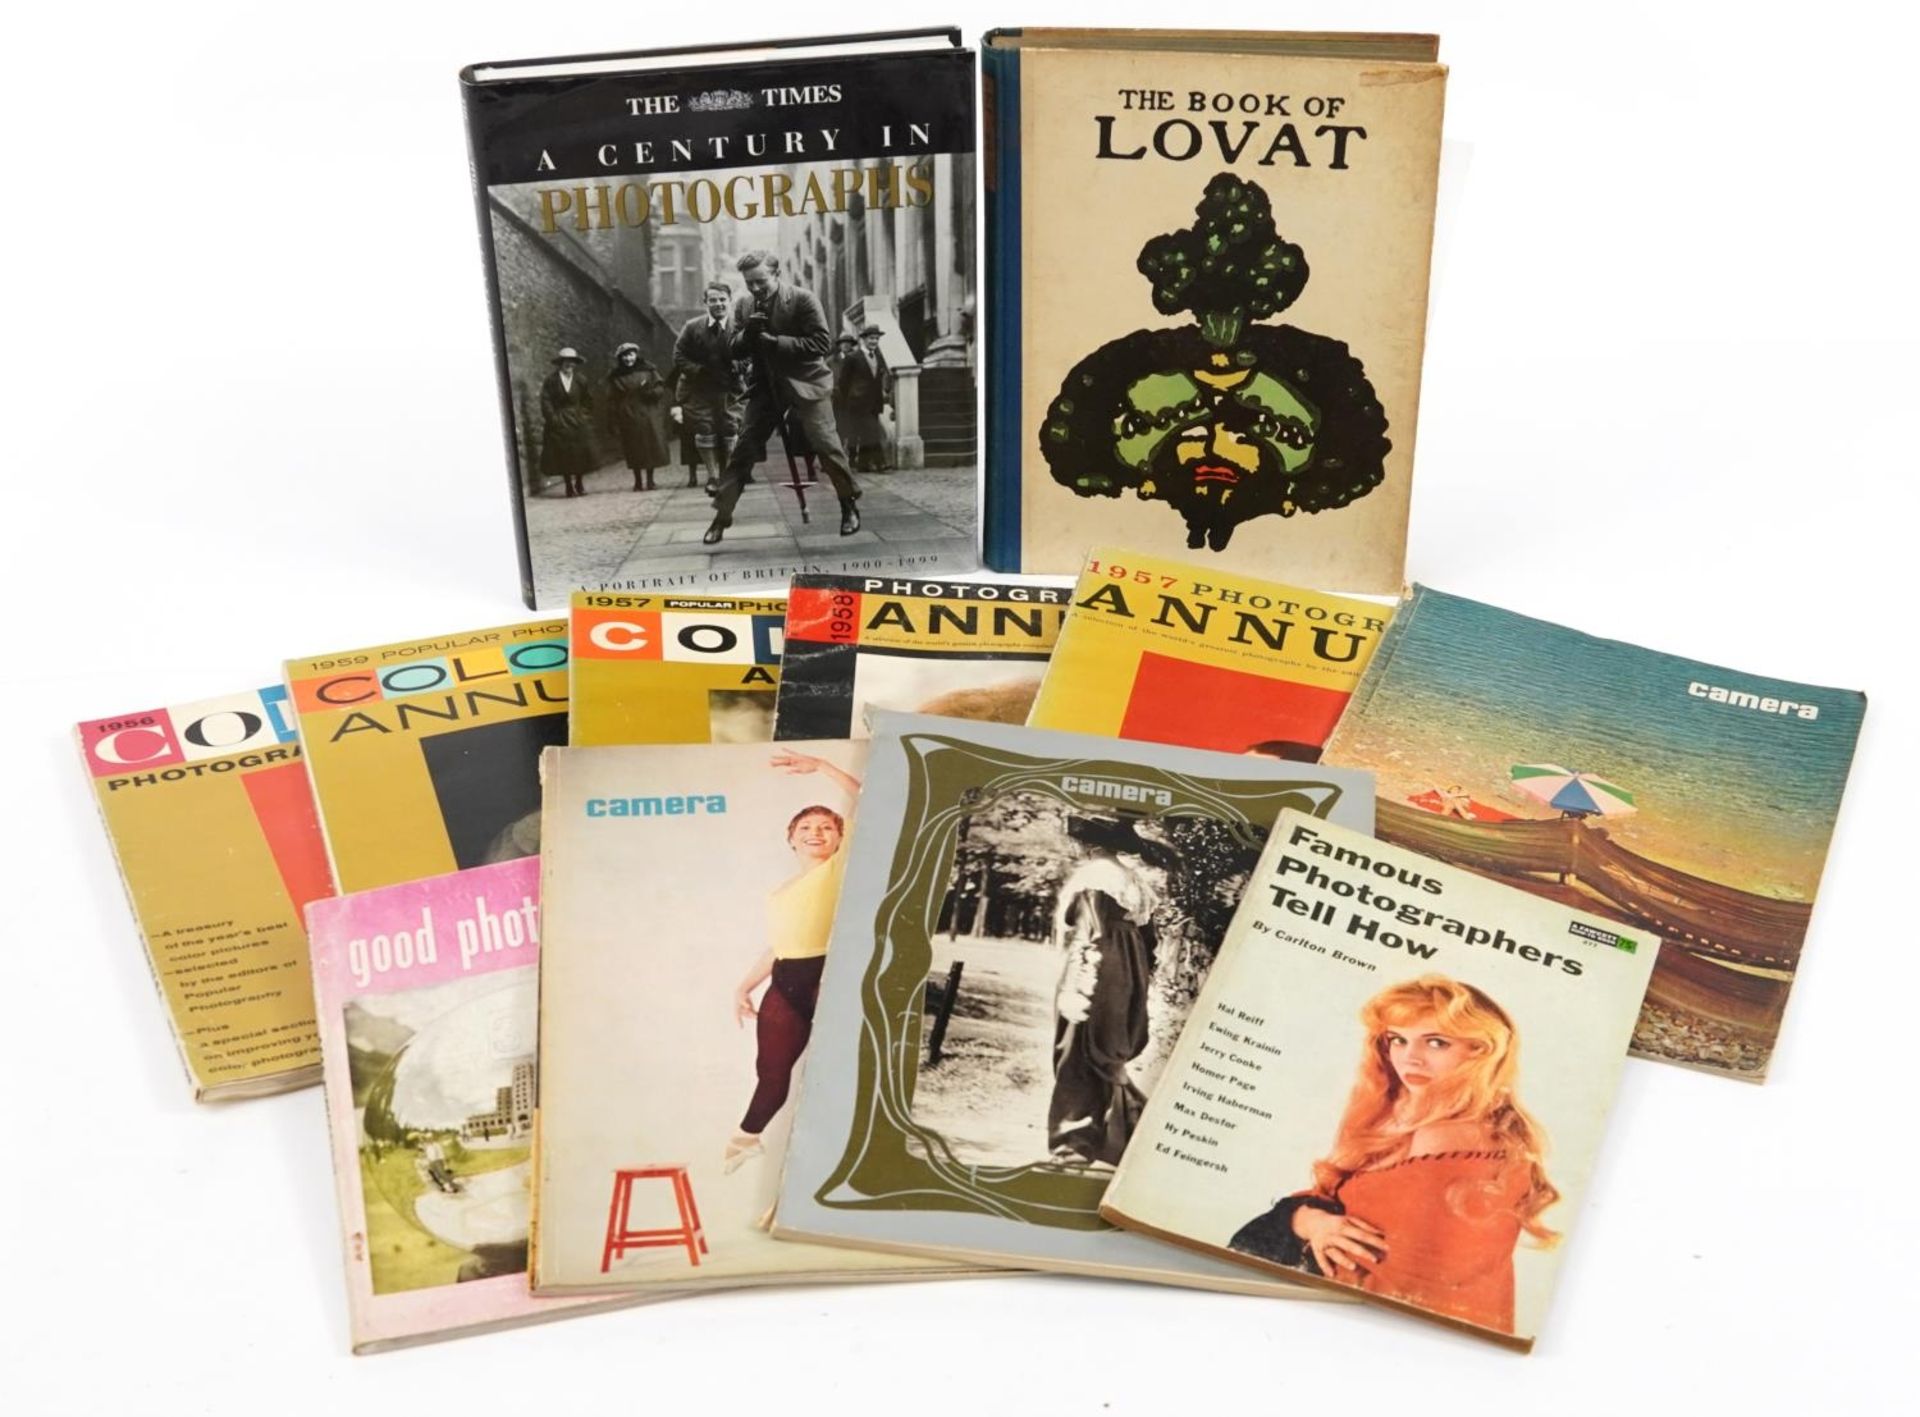 Photography related books including A Century of Photography and The Famous Photographers Tell How